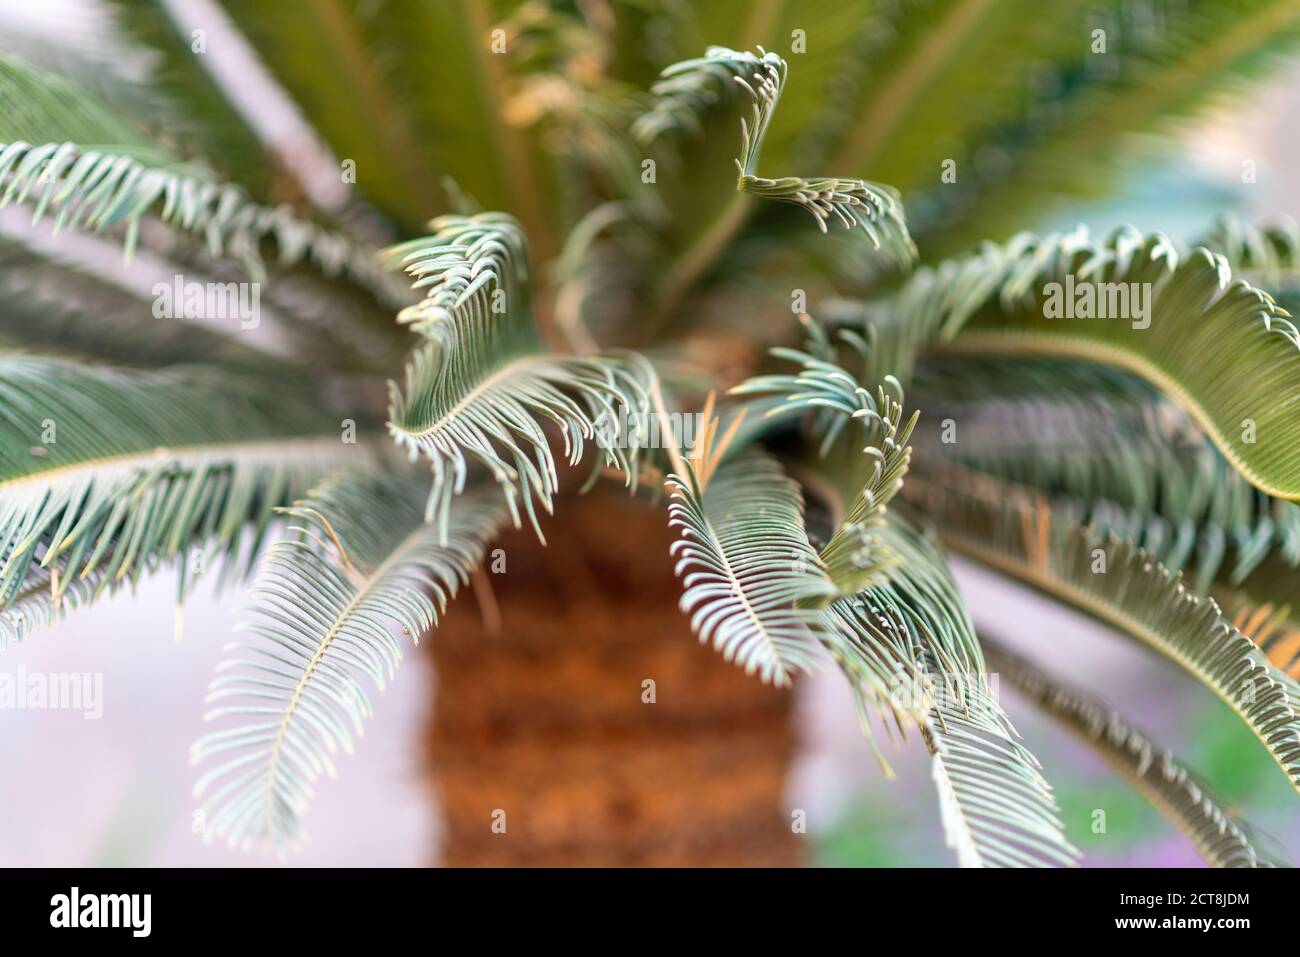 Tropical palm tree. Abstract nature blurred background. Stock Photo